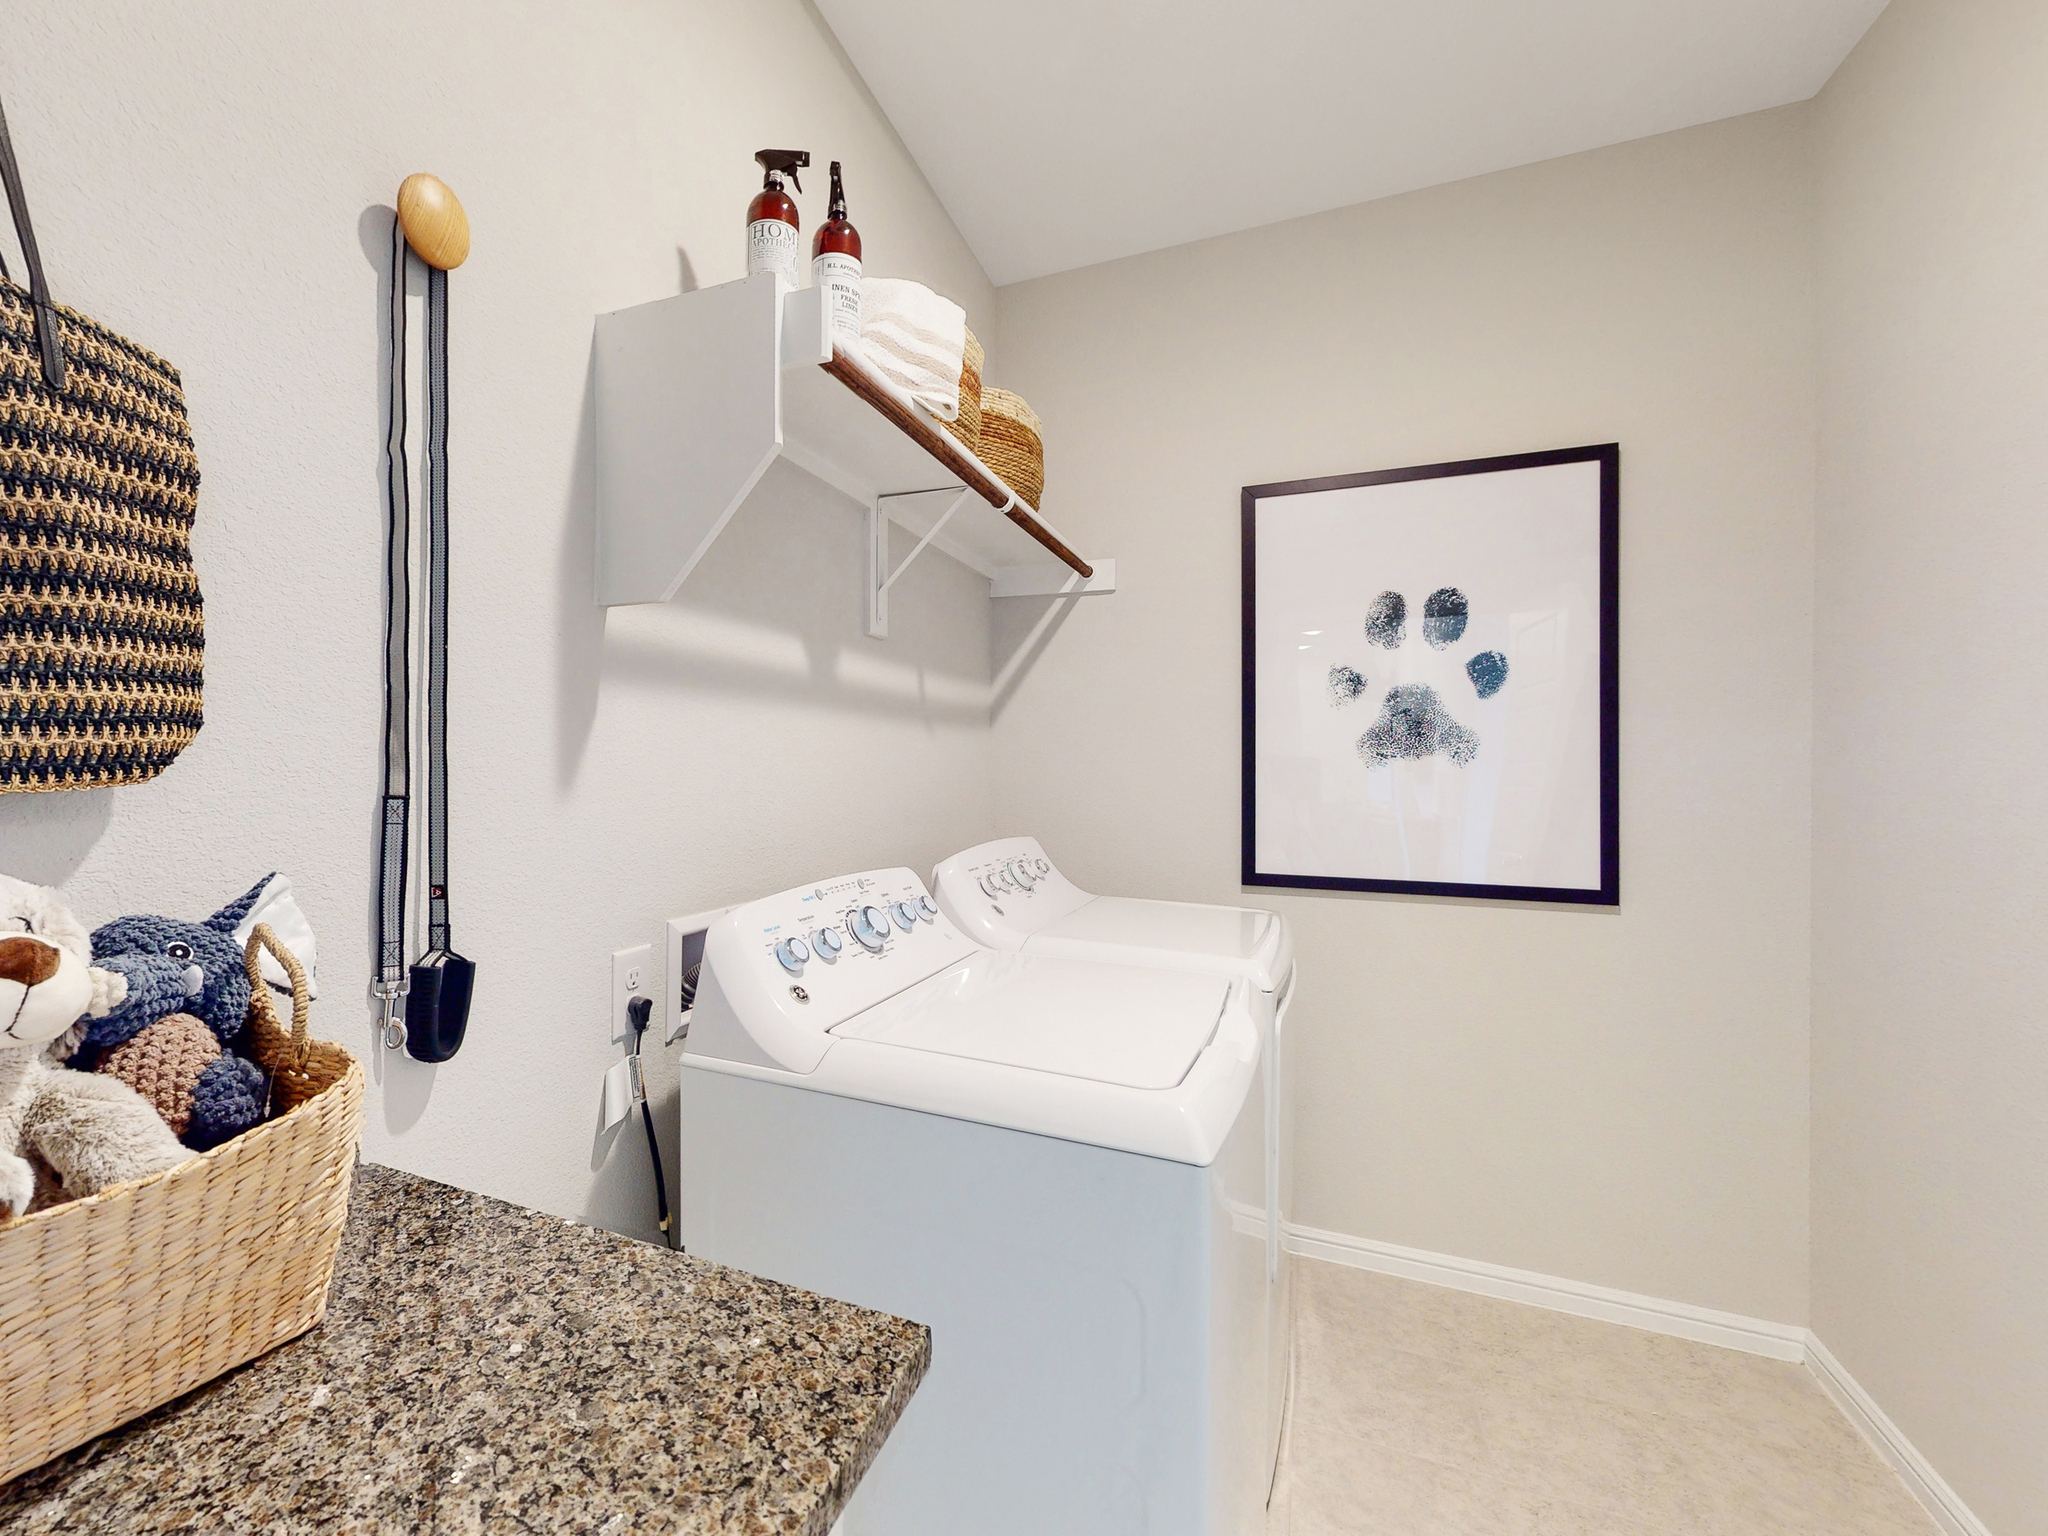 Laundry Room With Pet Décor and Storage